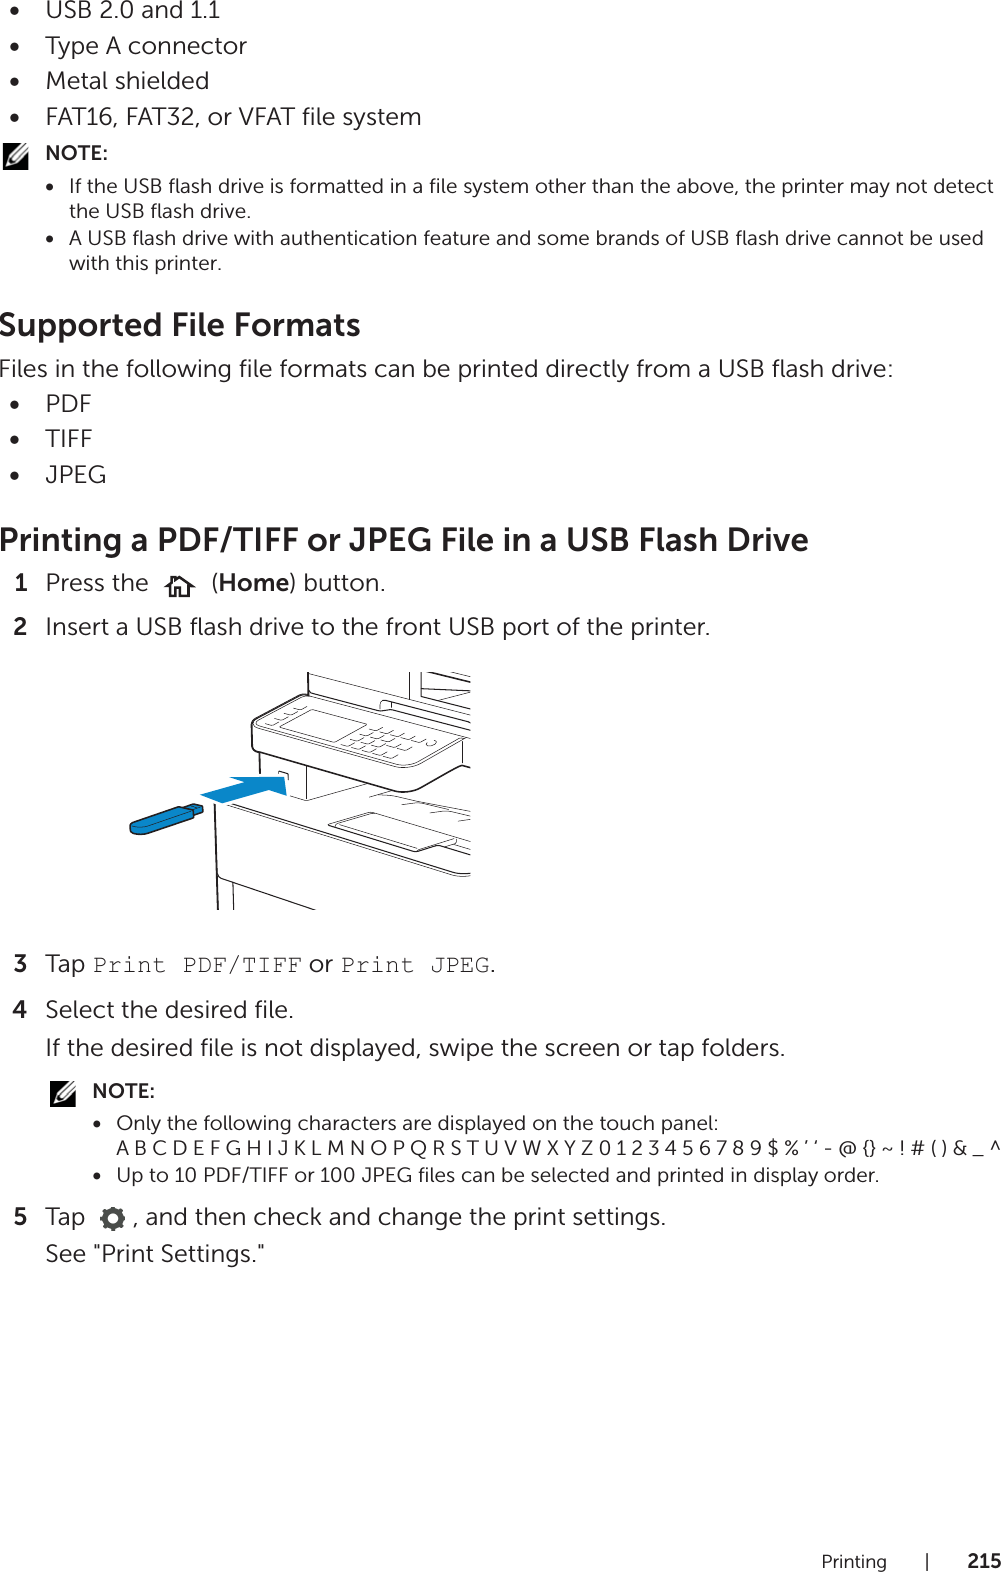 Printing |215•USB 2.0 and 1.1•Type A connector•Metal shielded•FAT16, FAT32, or VFAT file systemNOTE:•If the USB flash drive is formatted in a file system other than the above, the printer may not detect the USB flash drive.•A USB flash drive with authentication feature and some brands of USB flash drive cannot be used with this printer.Supported File FormatsFiles in the following file formats can be printed directly from a USB flash drive:•PDF•TIFF•JPEGPrinting a PDF/TIFF or JPEG File in a USB Flash Drive1Press the   (Home) button.2Insert a USB flash drive to the front USB port of the printer.3Tap Print PDF/TIFF or Print JPEG.4Select the desired file.If the desired file is not displayed, swipe the screen or tap folders.NOTE:•Only the following characters are displayed on the touch panel: A B C D E F G H I J K L M N O P Q R S T U V W X Y Z 0 1 2 3 4 5 6 7 8 9 $ % ’ ‘ - @ {} ~ ! # ( ) &amp; _ ^•Up to 10 PDF/TIFF or 100 JPEG files can be selected and printed in display order.5Tap  , and then check and change the print settings.See &quot;Print Settings.&quot;